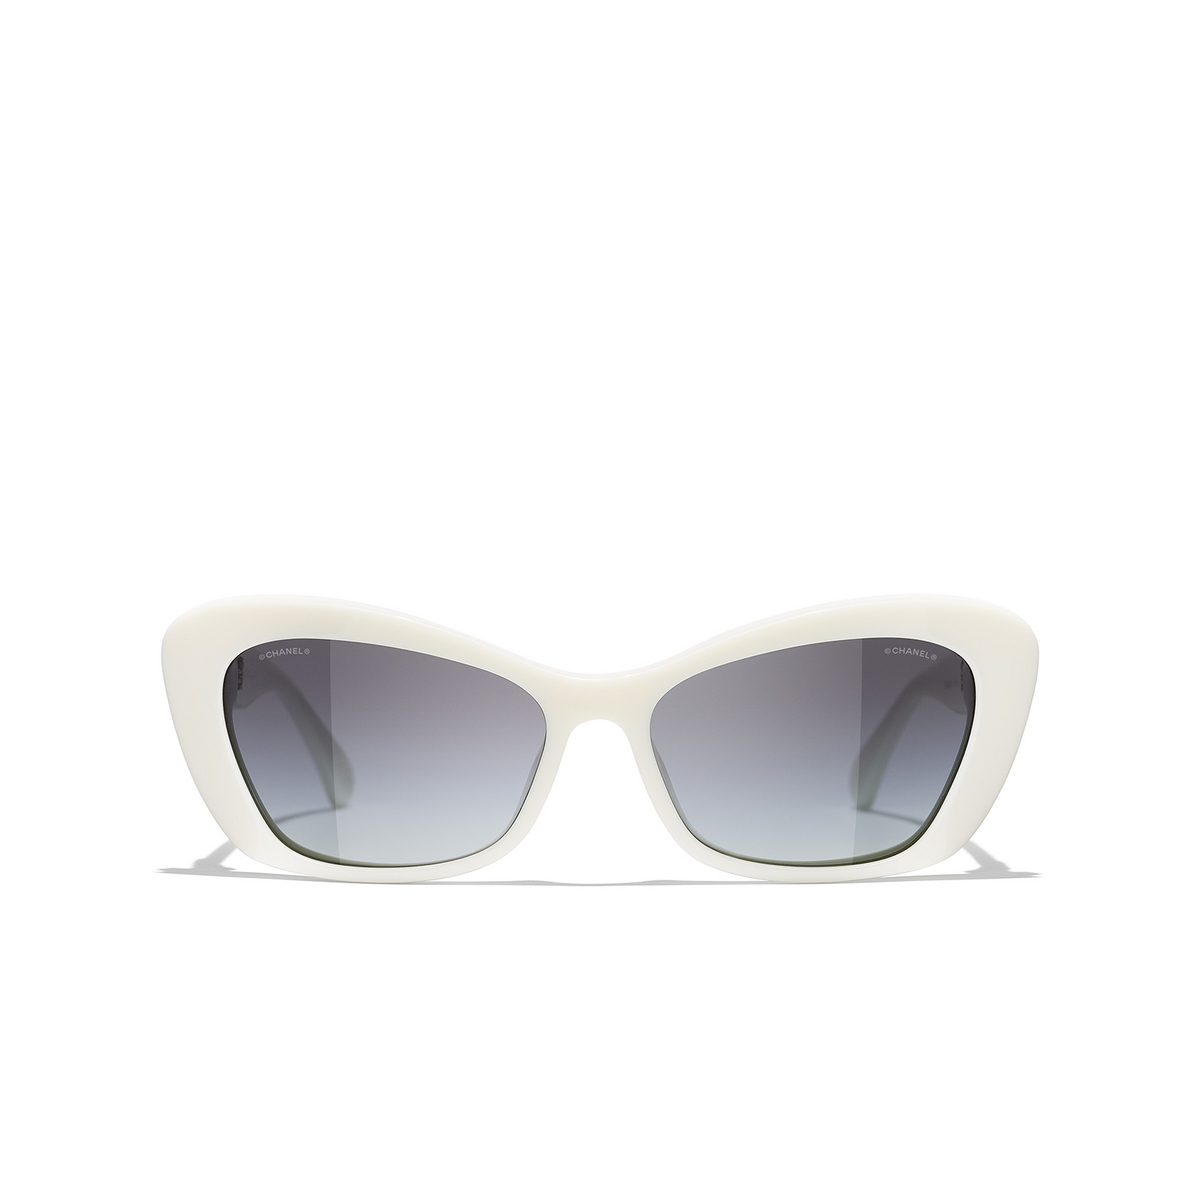 CHANEL cateye Sunglasses 1255S6 White - front view